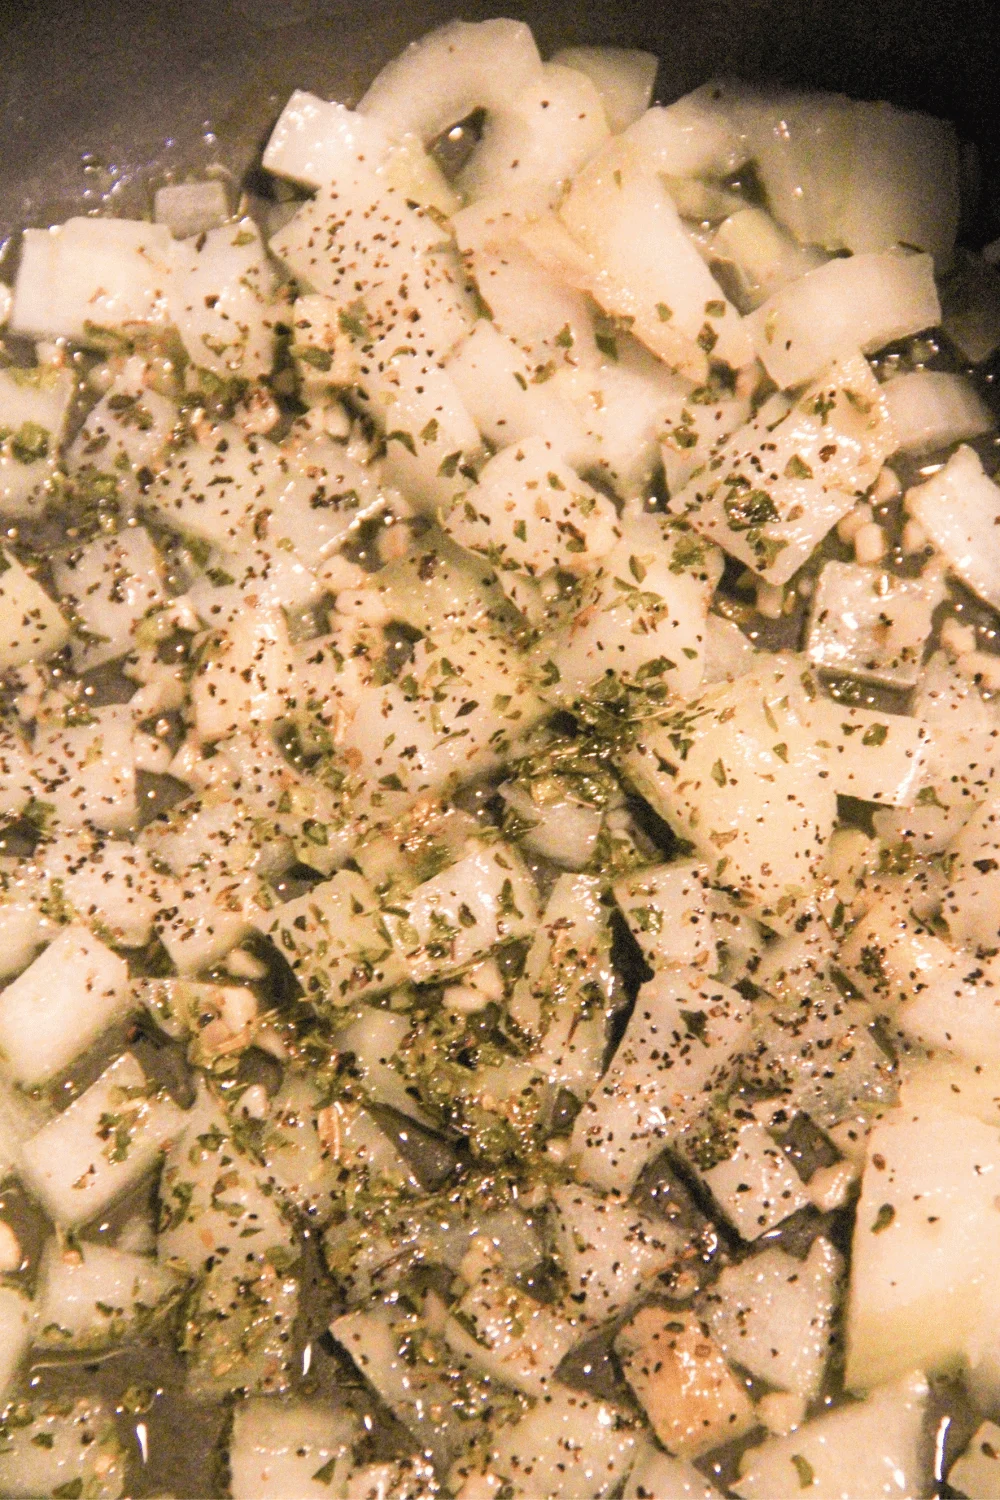 frying onions with herbs for ww chicken pot pie recipe